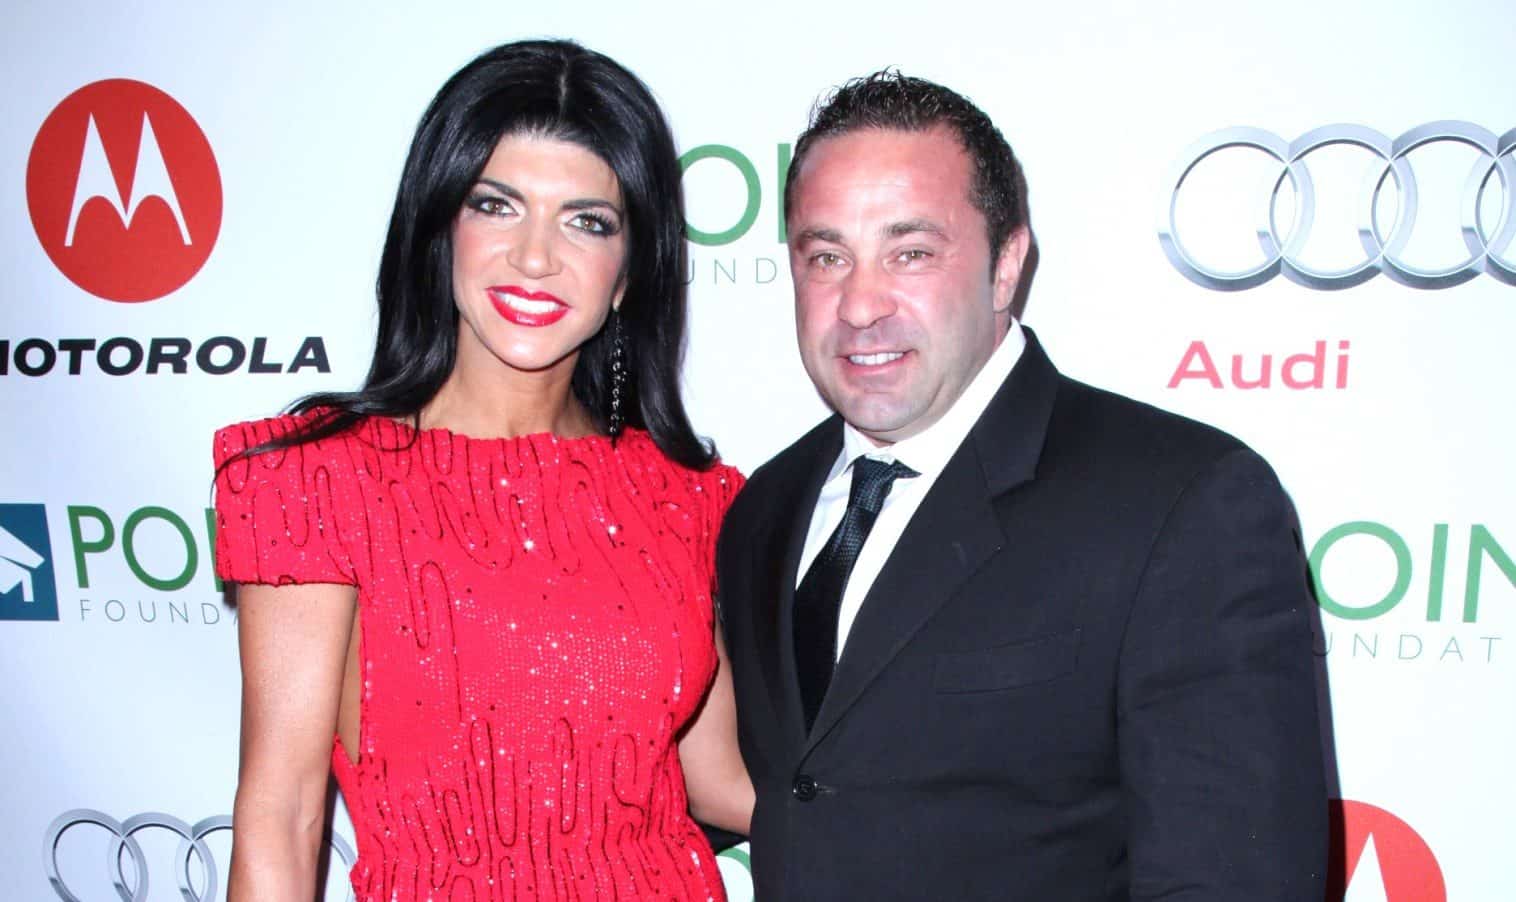 REPORT: Teresa Giudice is Only Reuniting With Joe for a Bravo Paycheck and the Sake of Their Kids, Plus More Details on RHONJ Stars' Interview